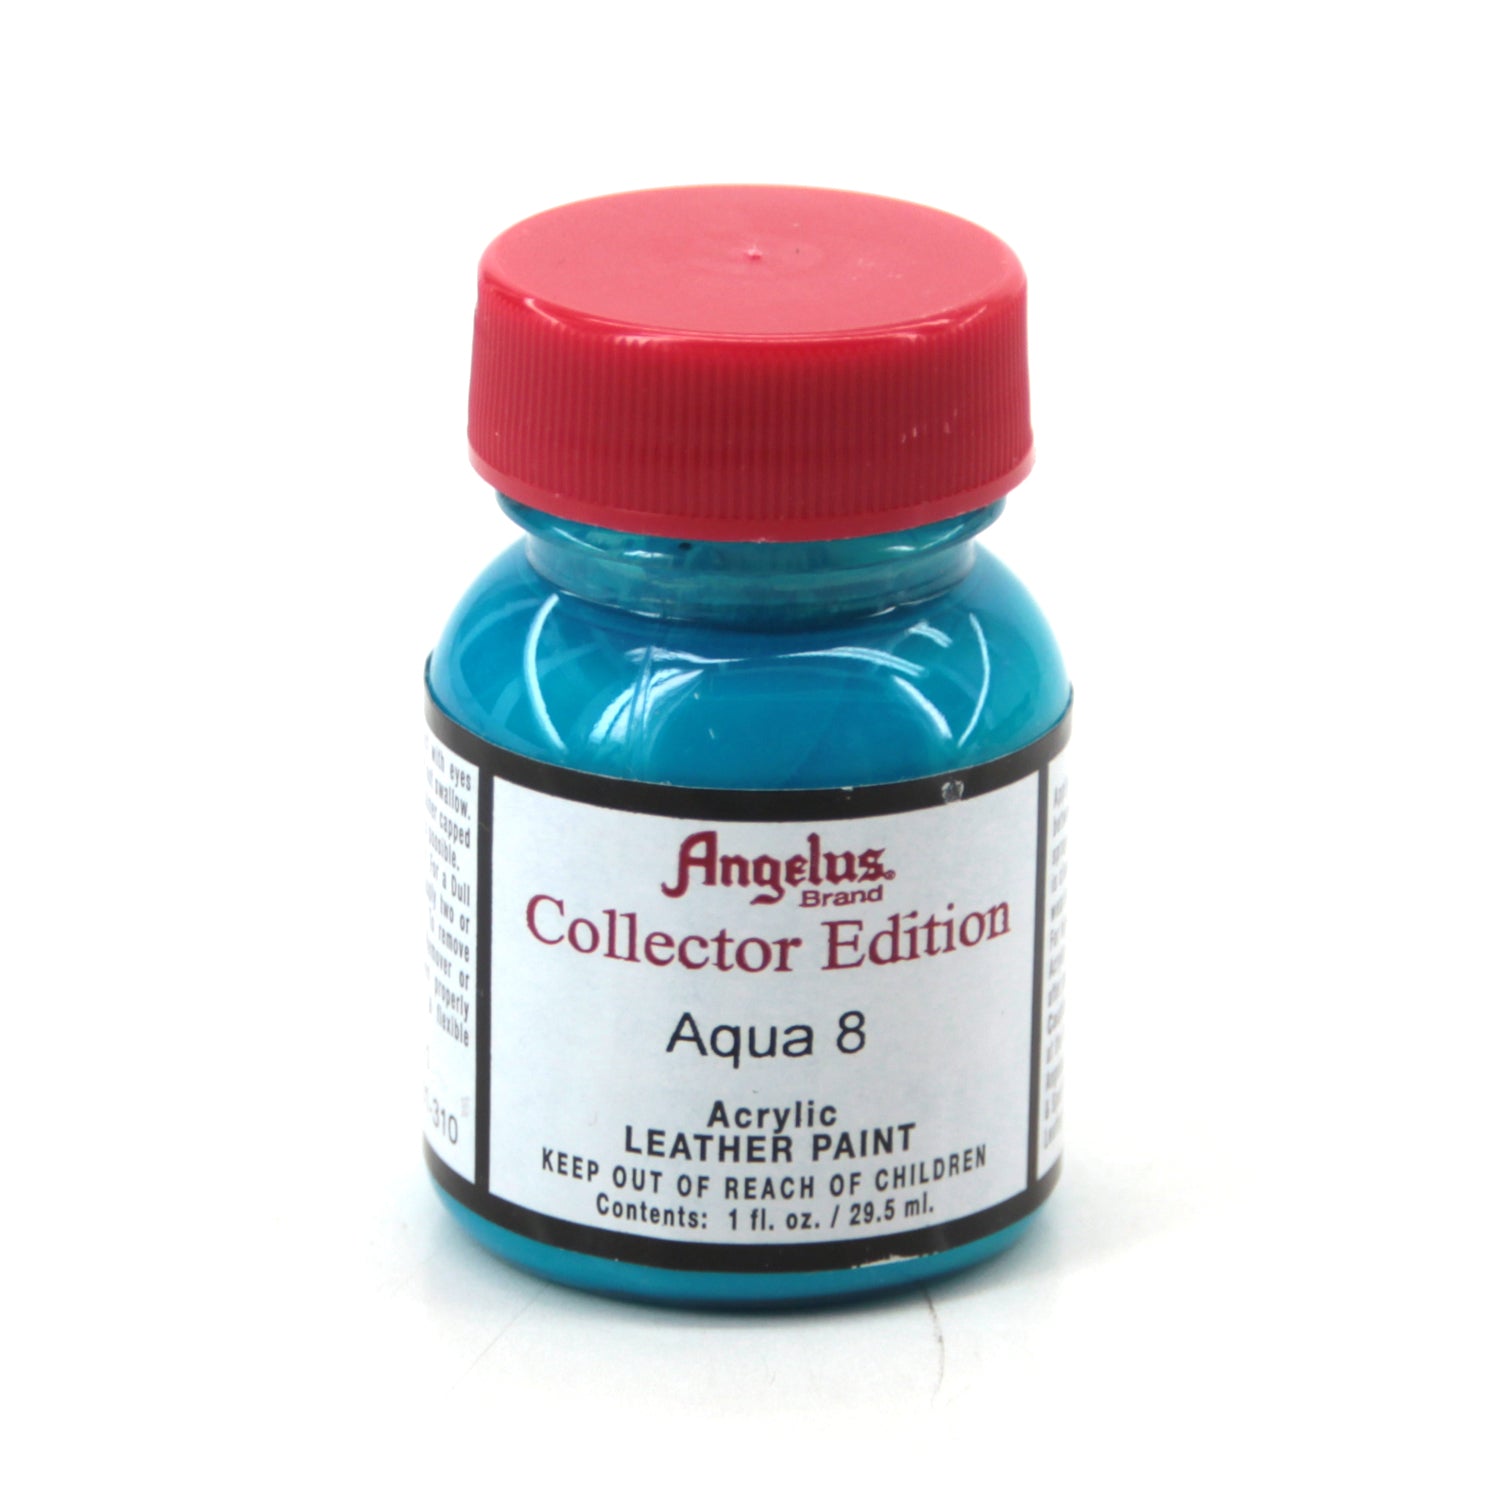  Angelus Collector Edition Leather Paint, Aqua 8